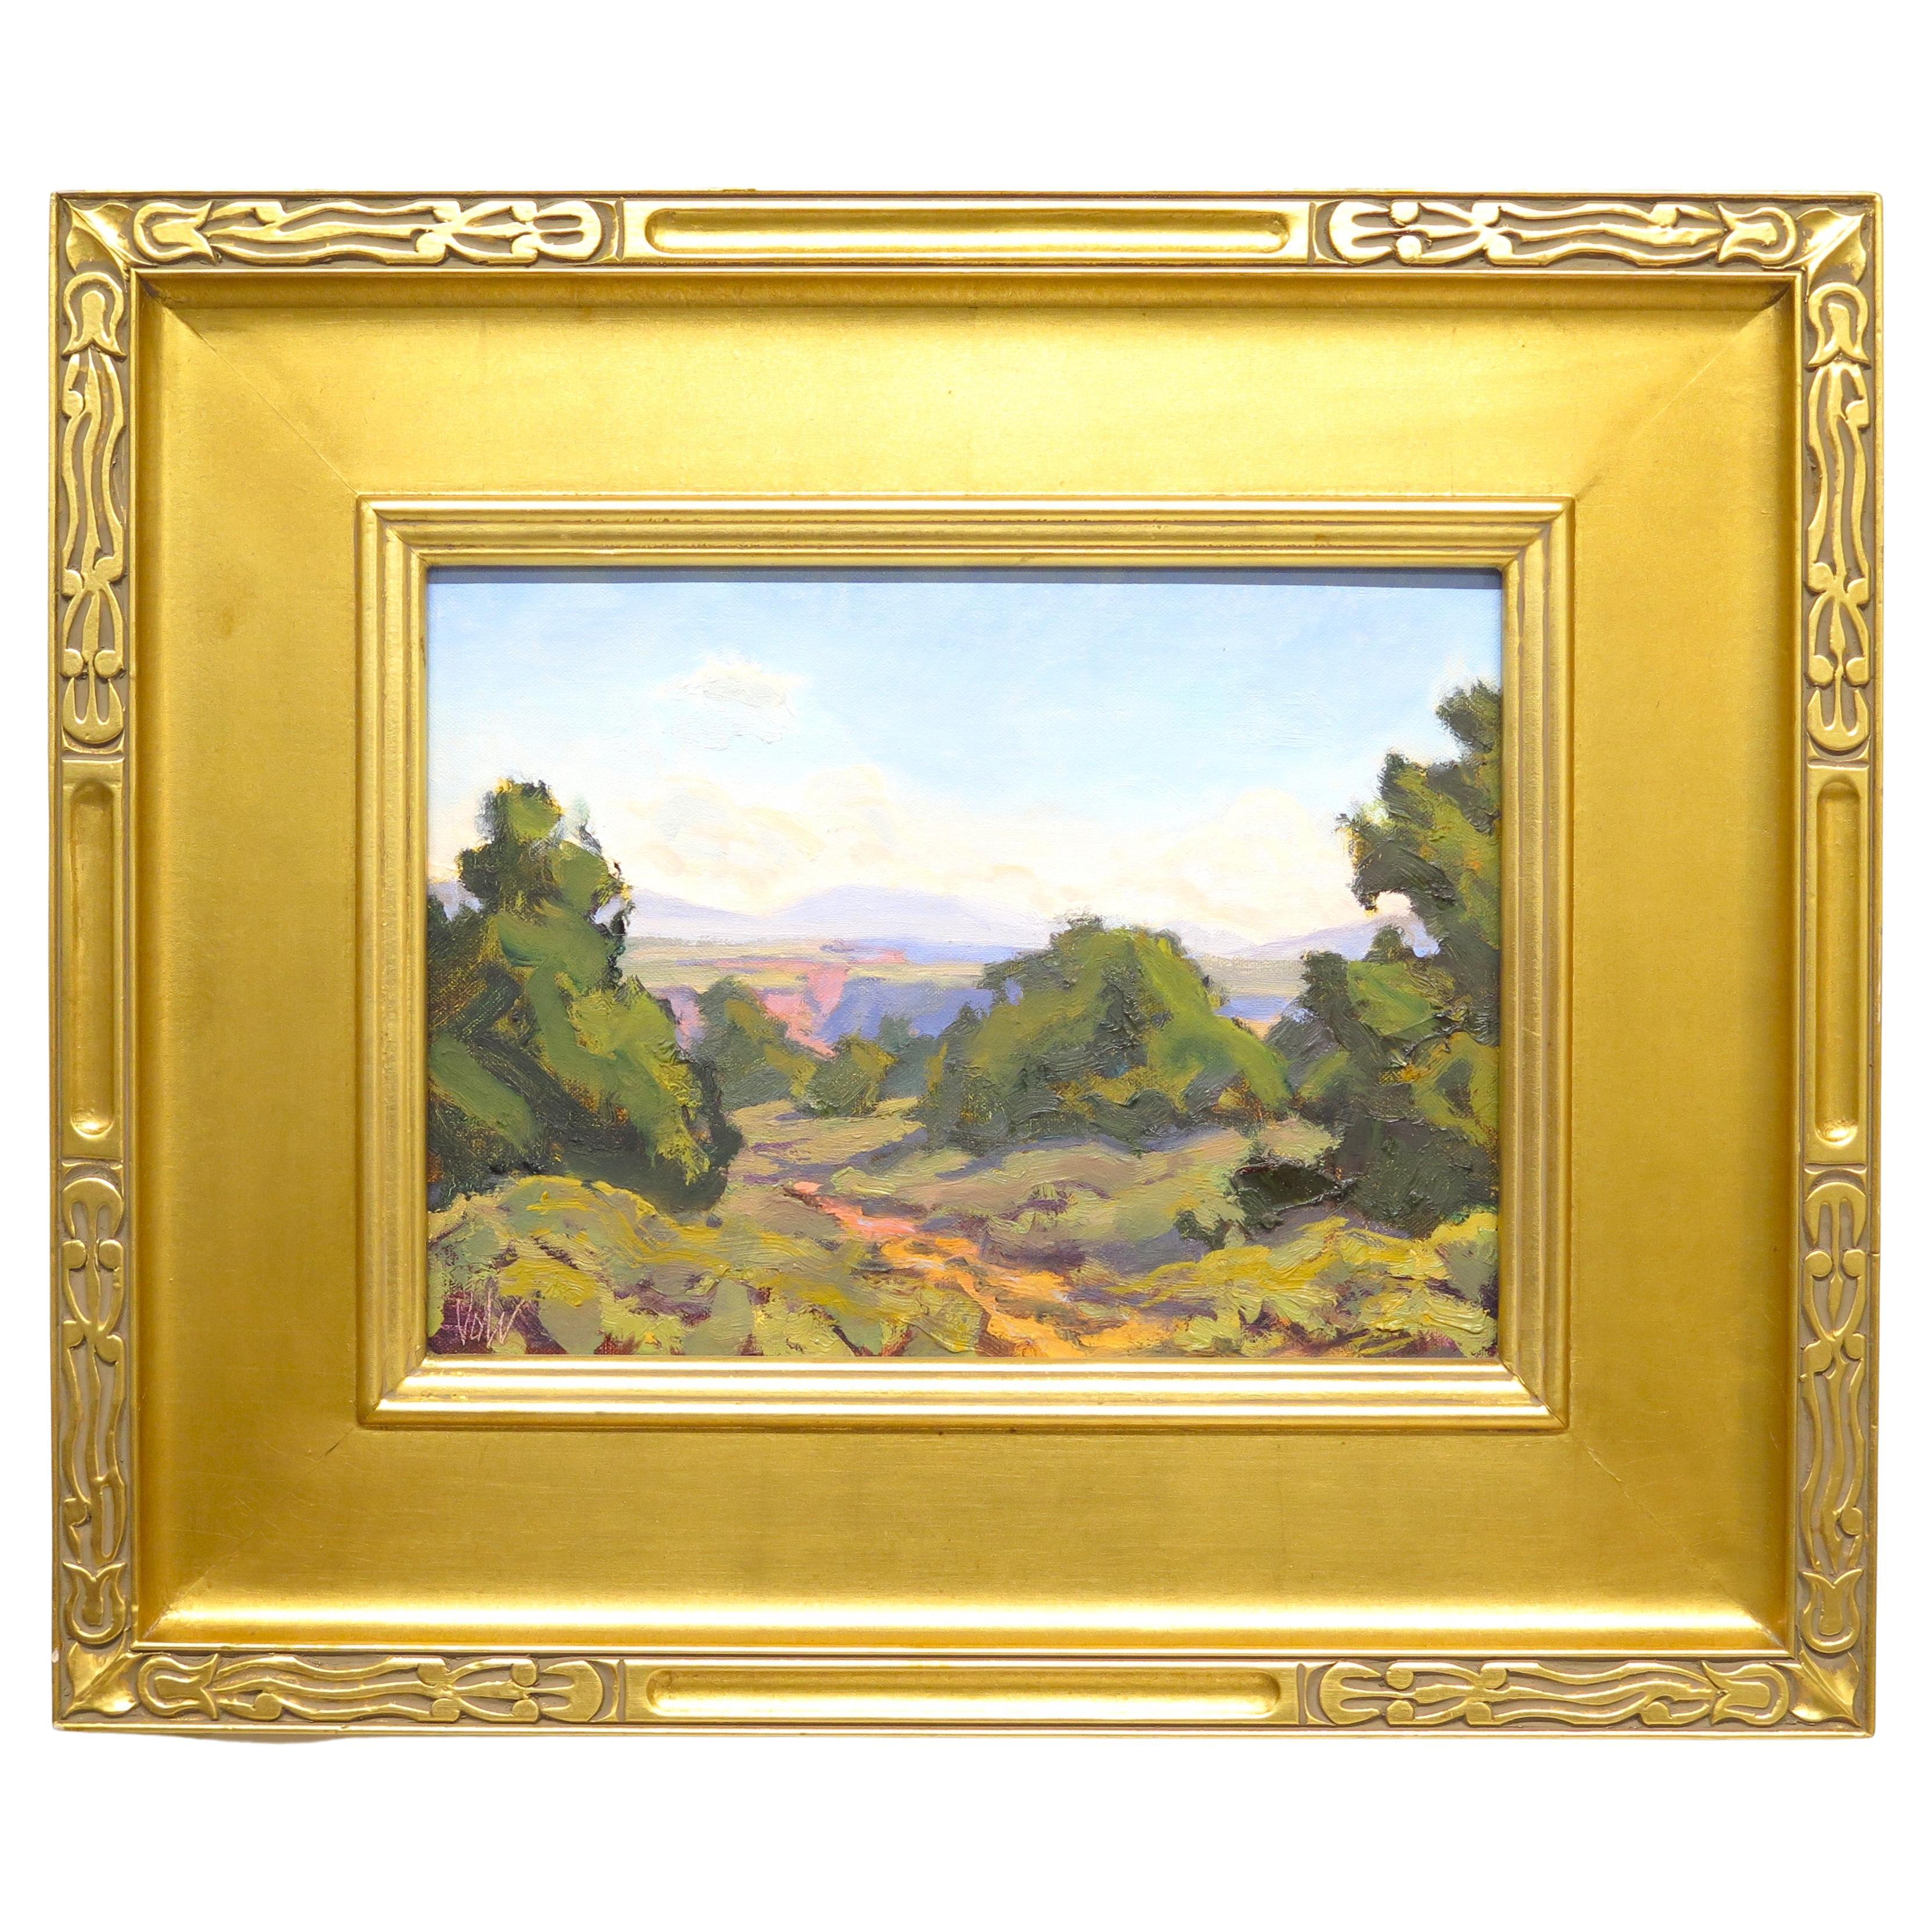 "Morning Gorge" by Charles "Chuck" Volz (American, 1945-2020) For Sale